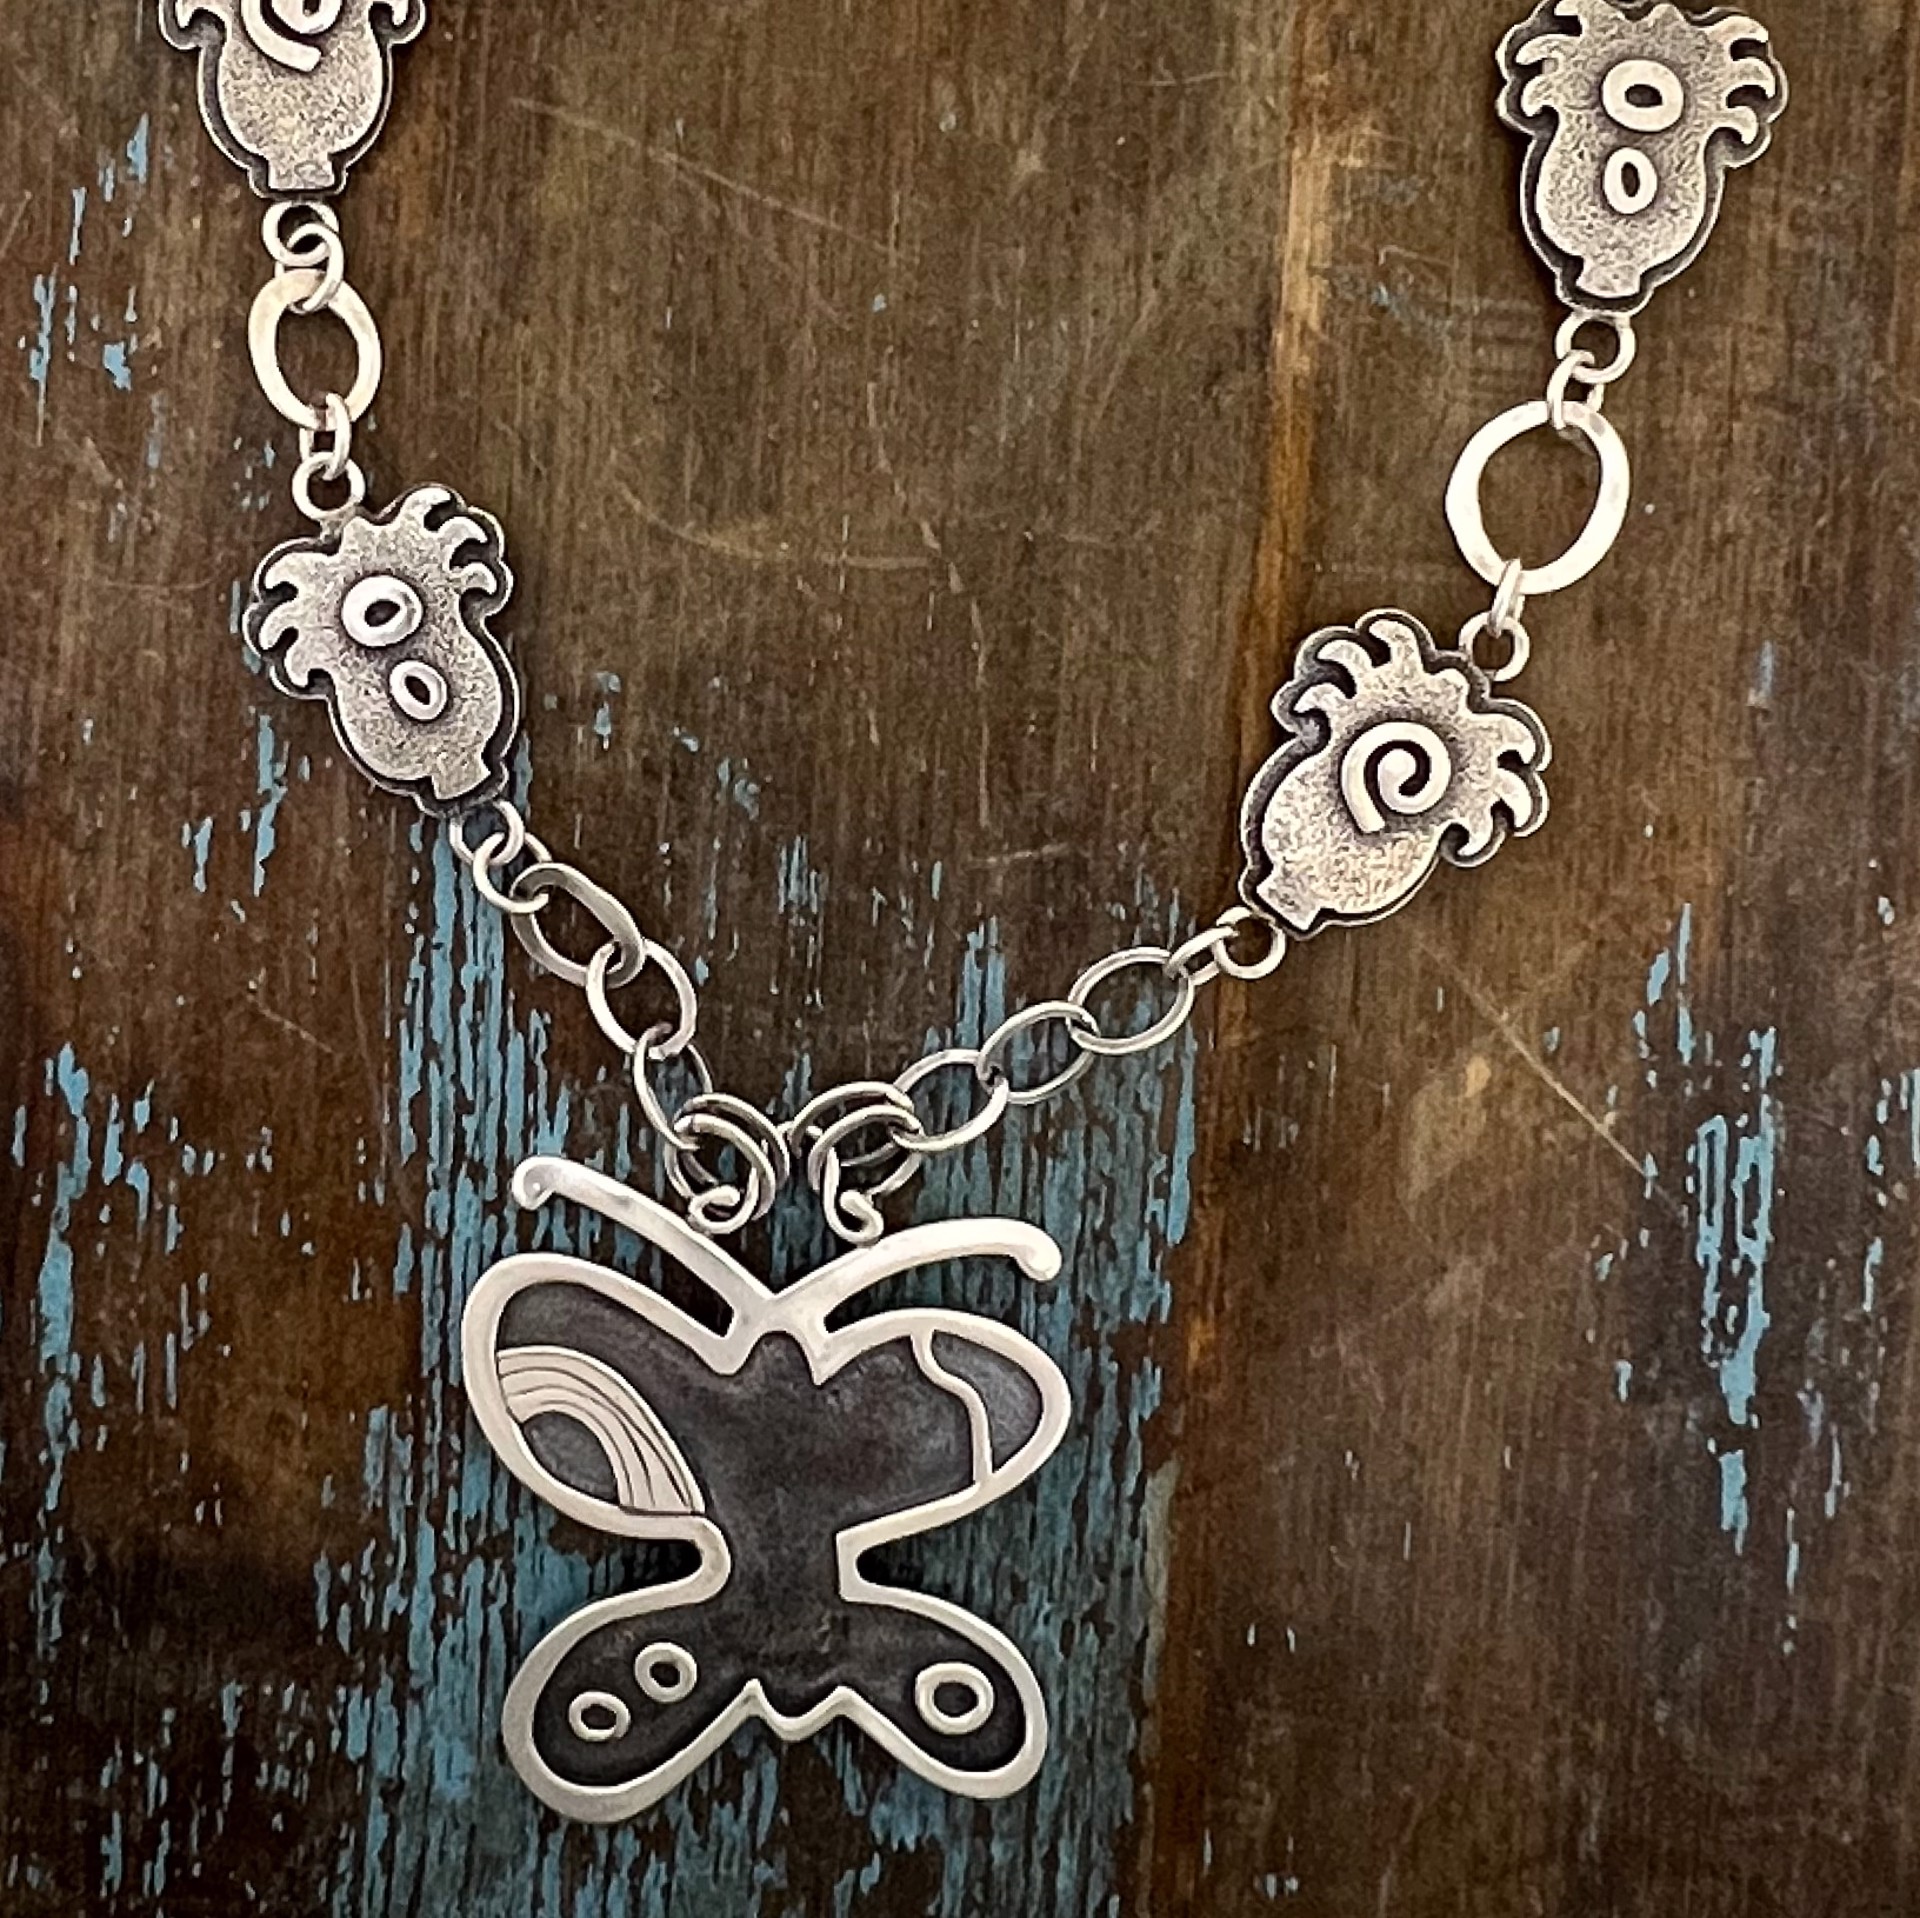 Butterfly & Plant Life beads necklace adjustable by Melanie Yazzie